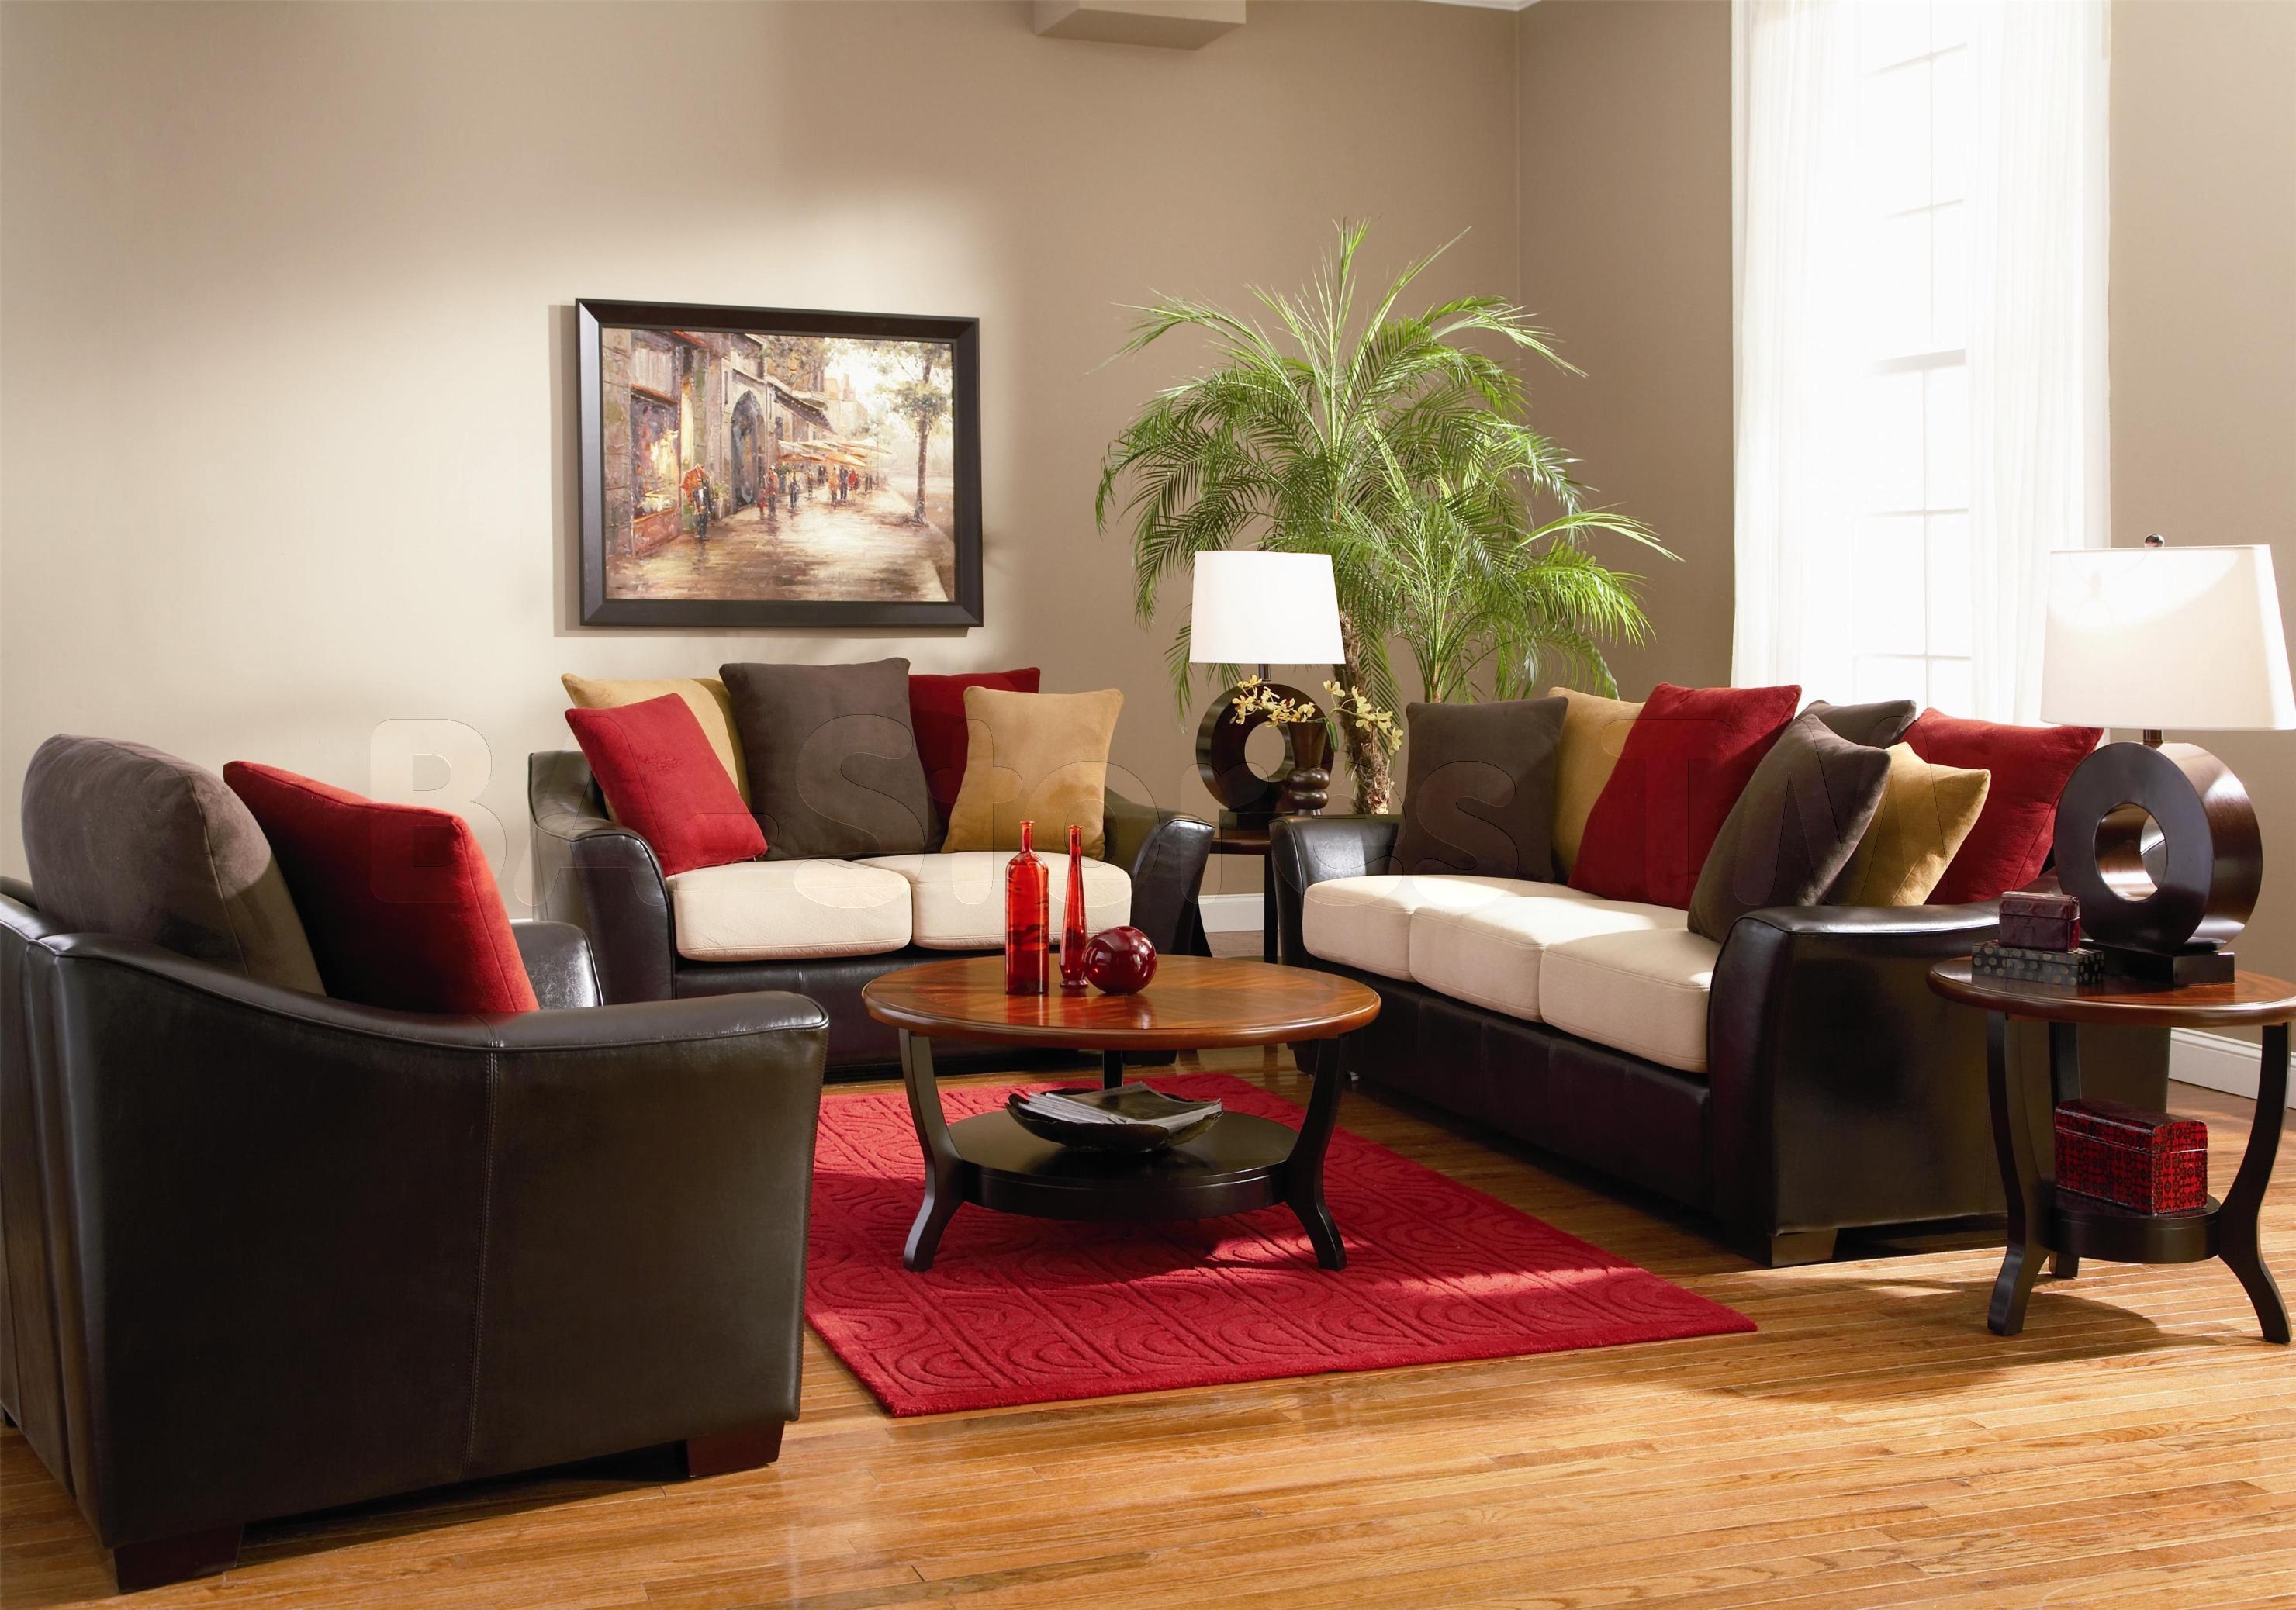 full size of living room decor:brown living room furniture decorating ideas JXXCKUY